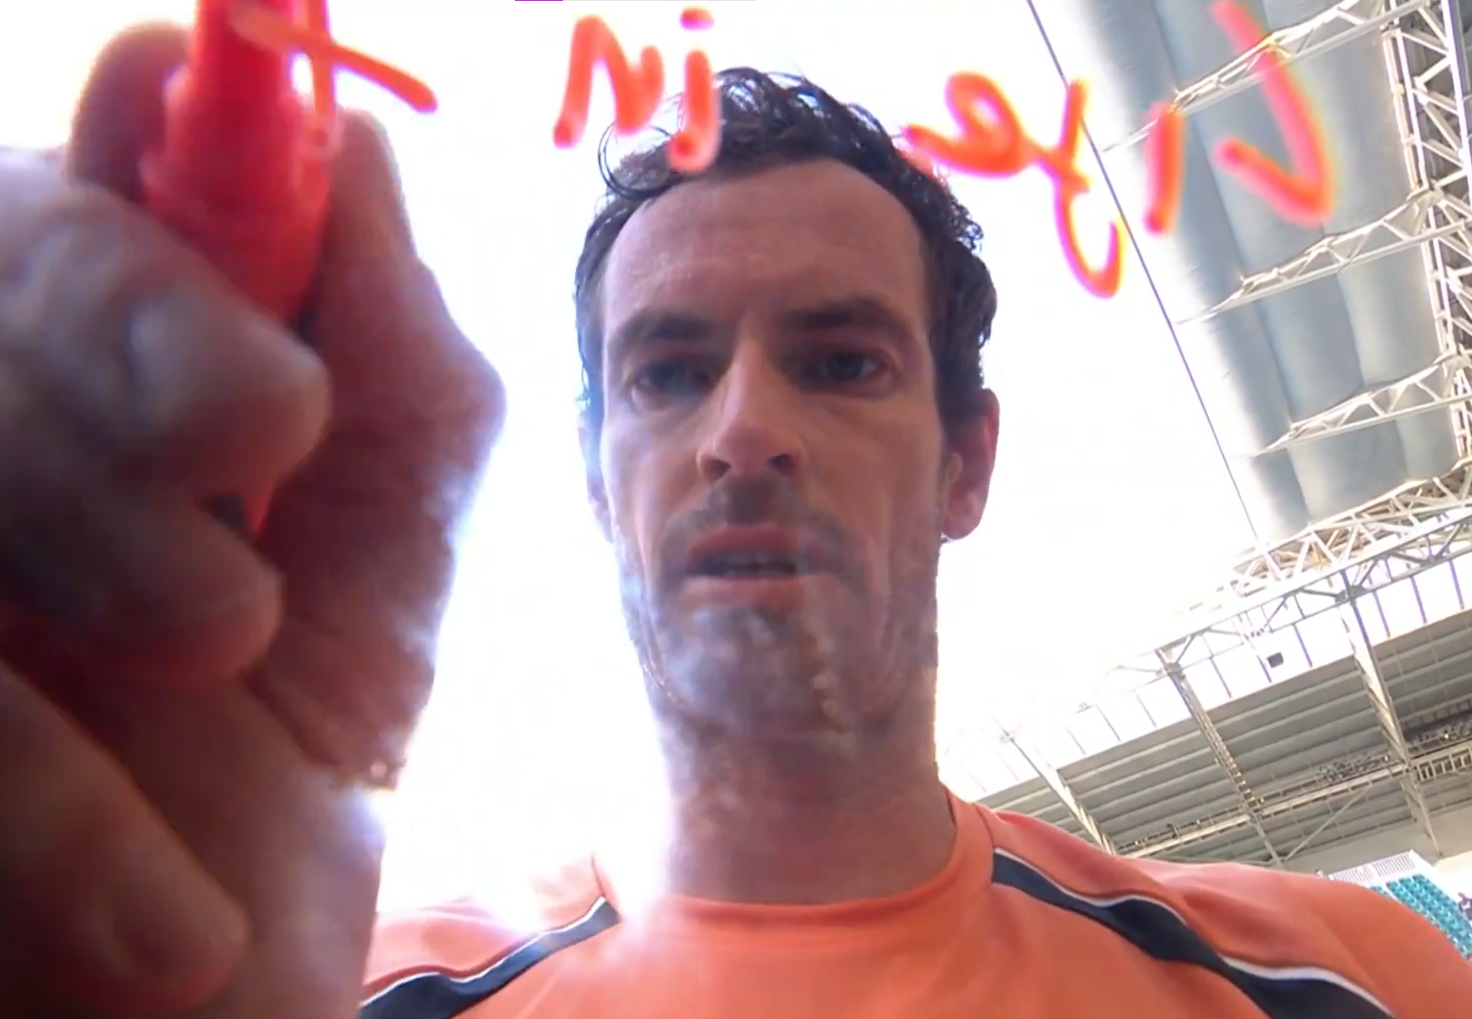 Murray took a pen and squiggled a message across the lens